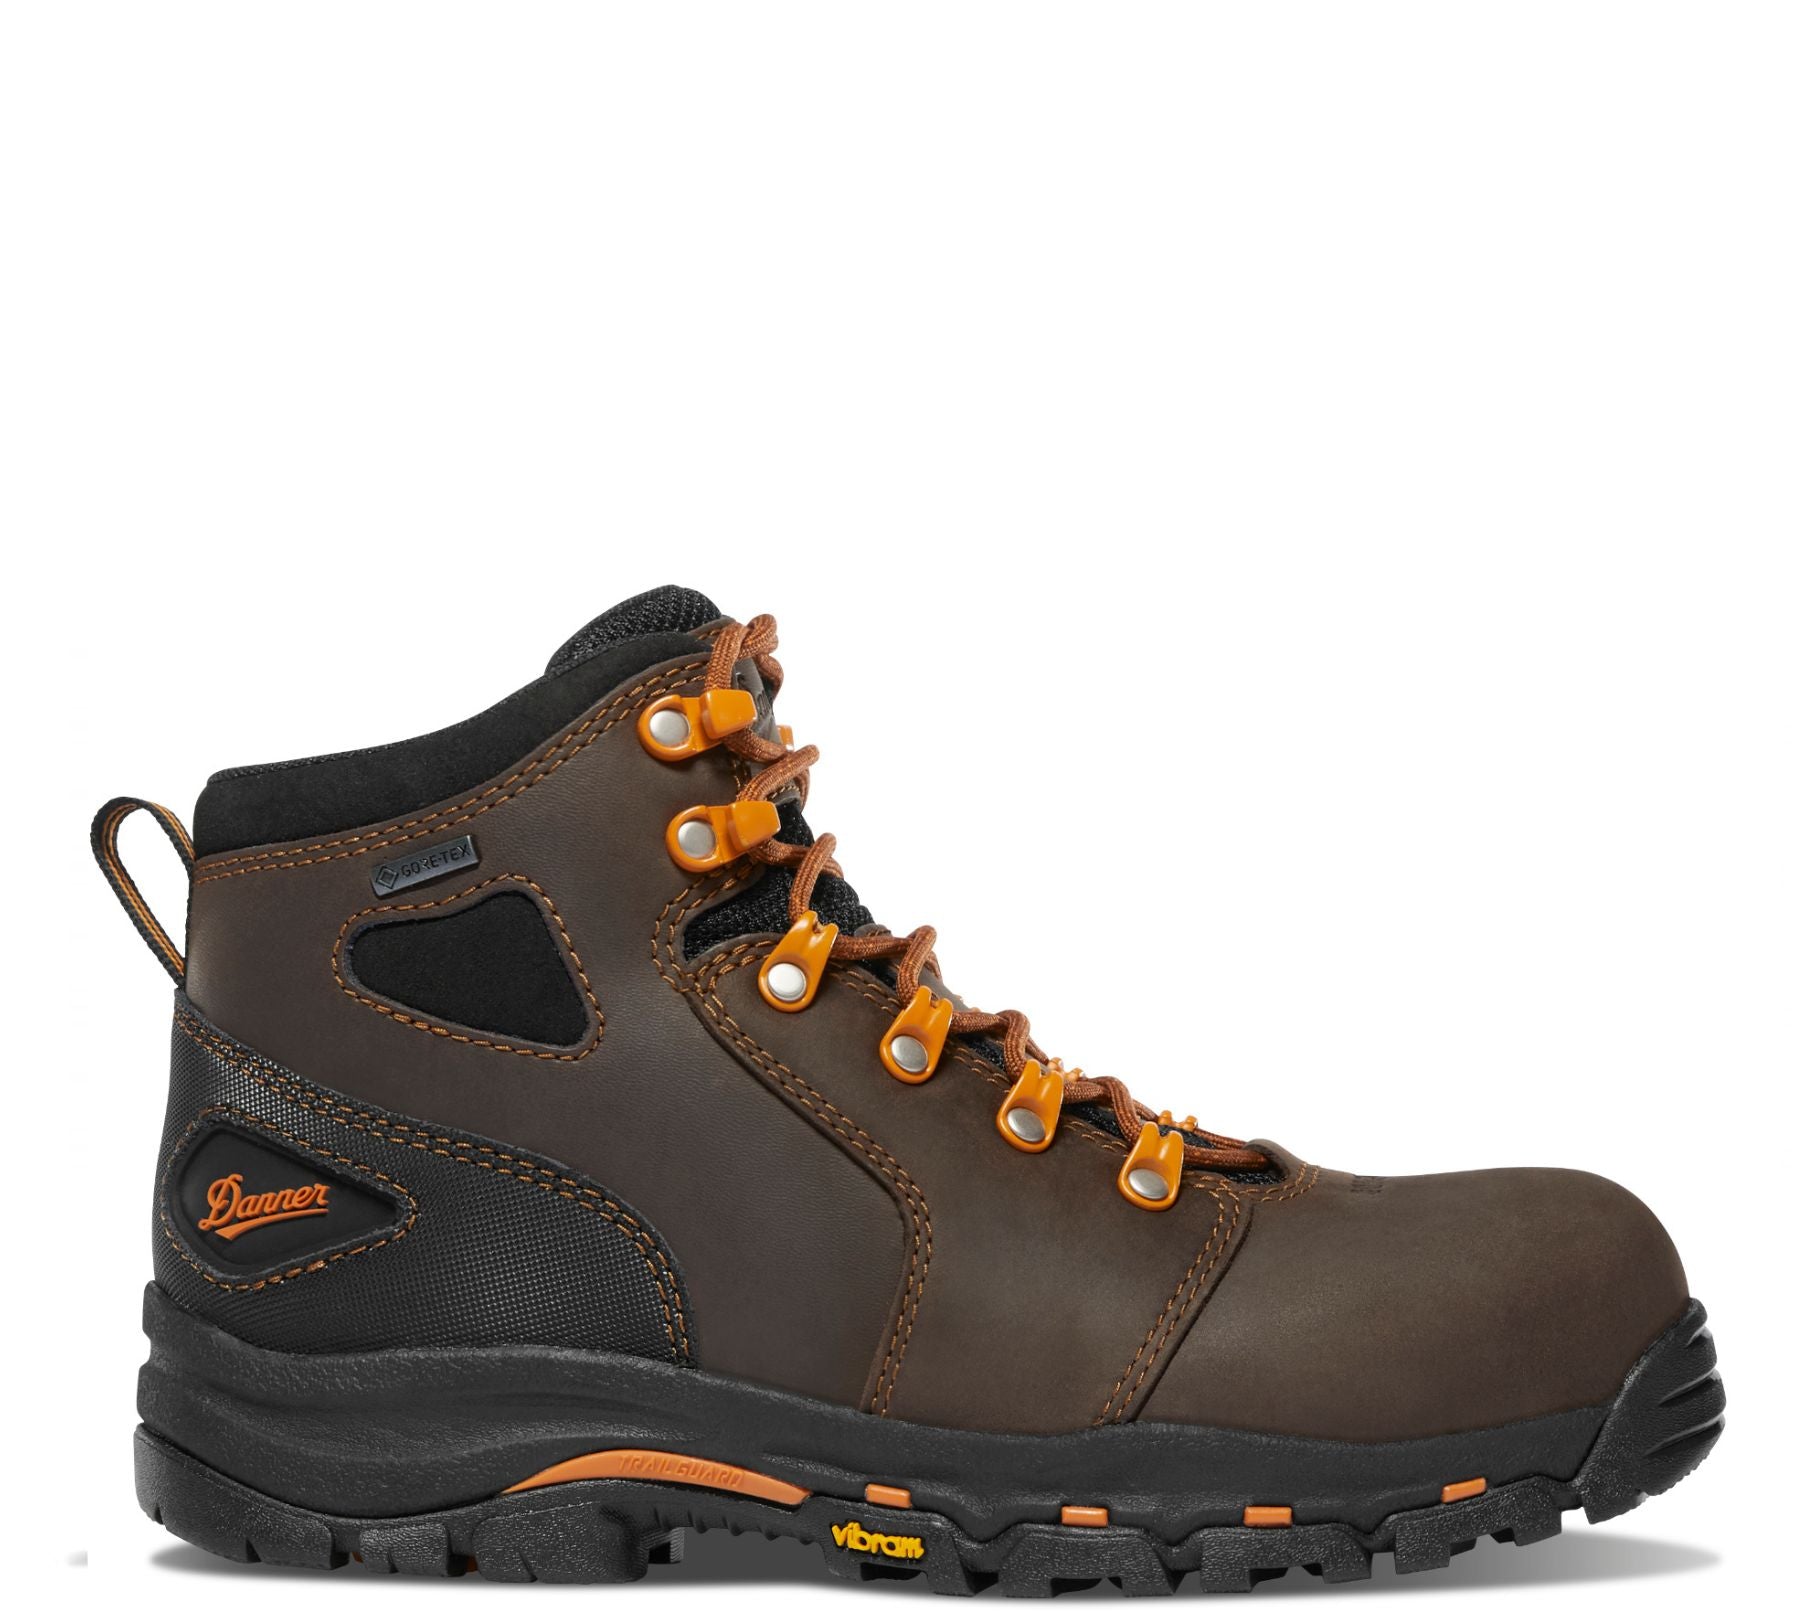 Danner Women's 4" Vicious Waterpoof EH Soft Toe Work Boot - Work World - Workwear, Work Boots, Safety Gear